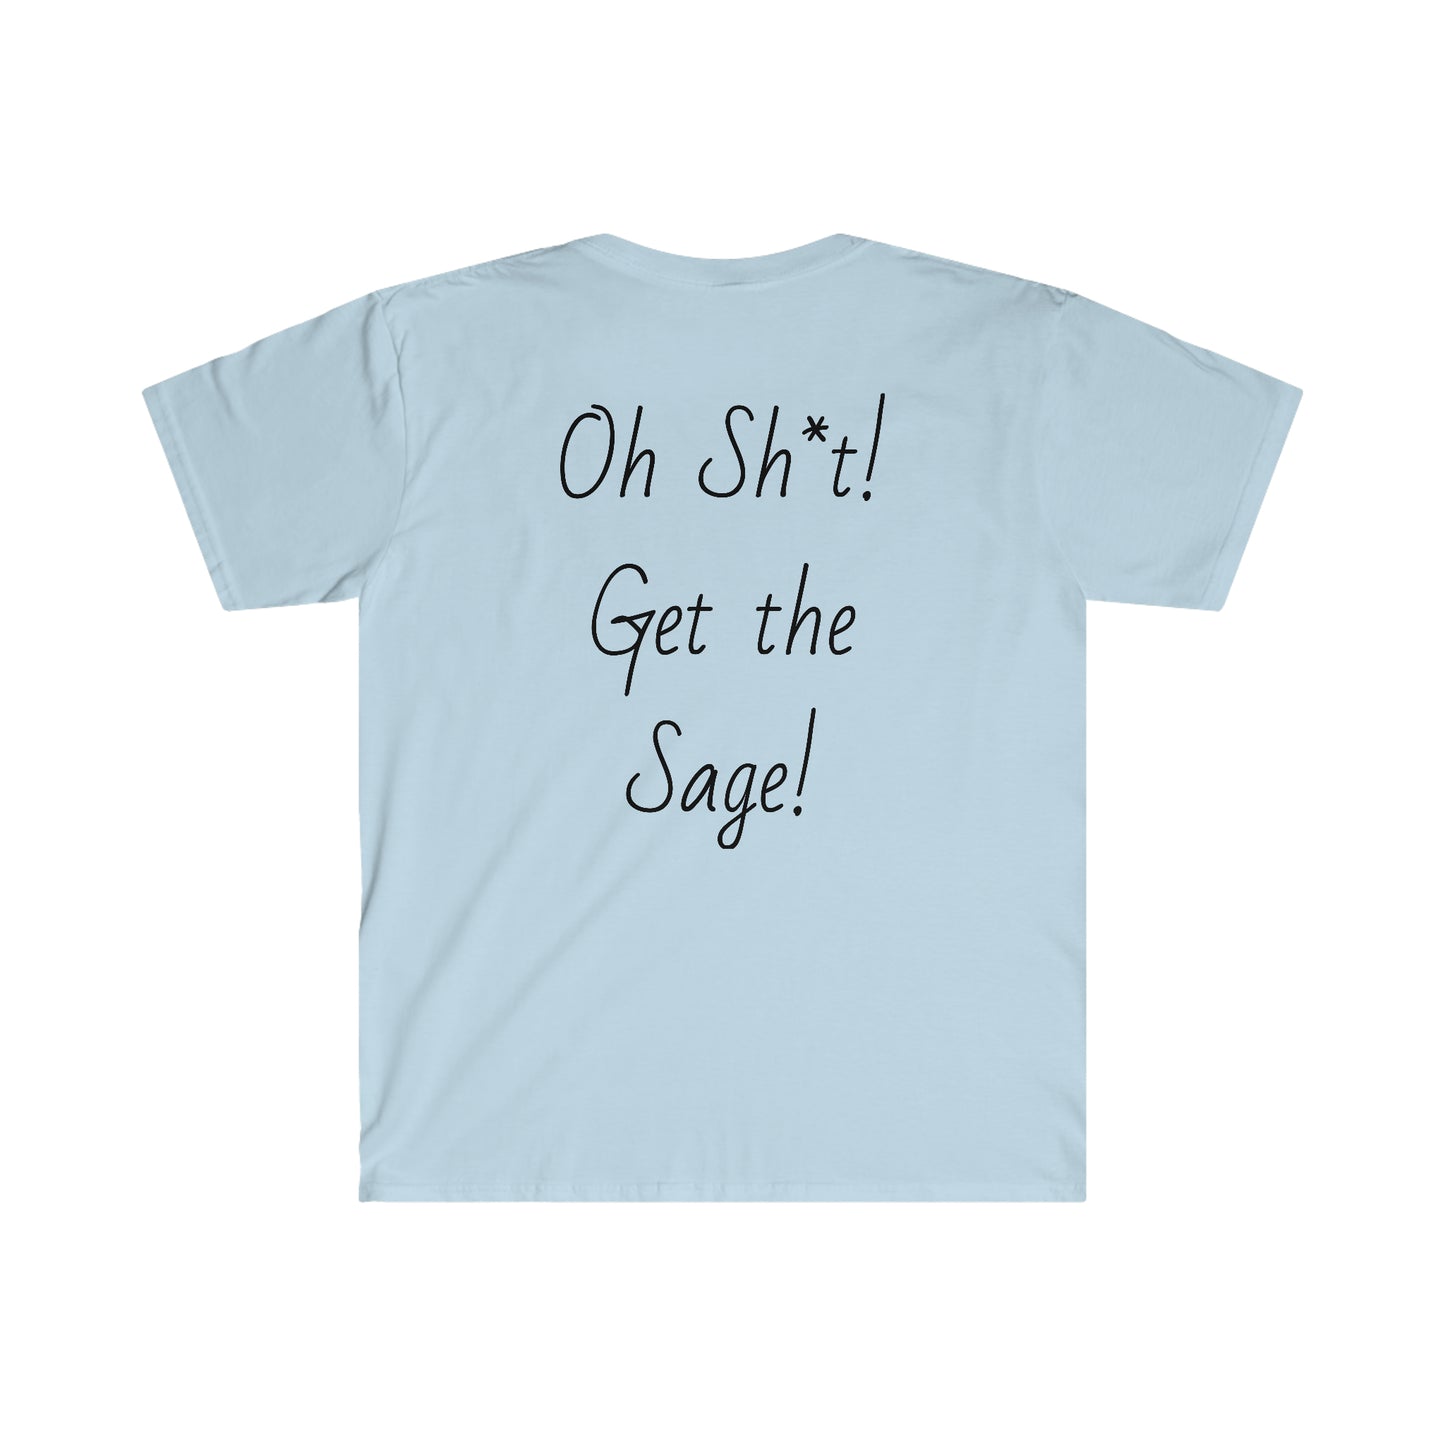 Oh Sh*t! Get the Sage!   Booze, Boos and my favorite Boos  T-Shirt